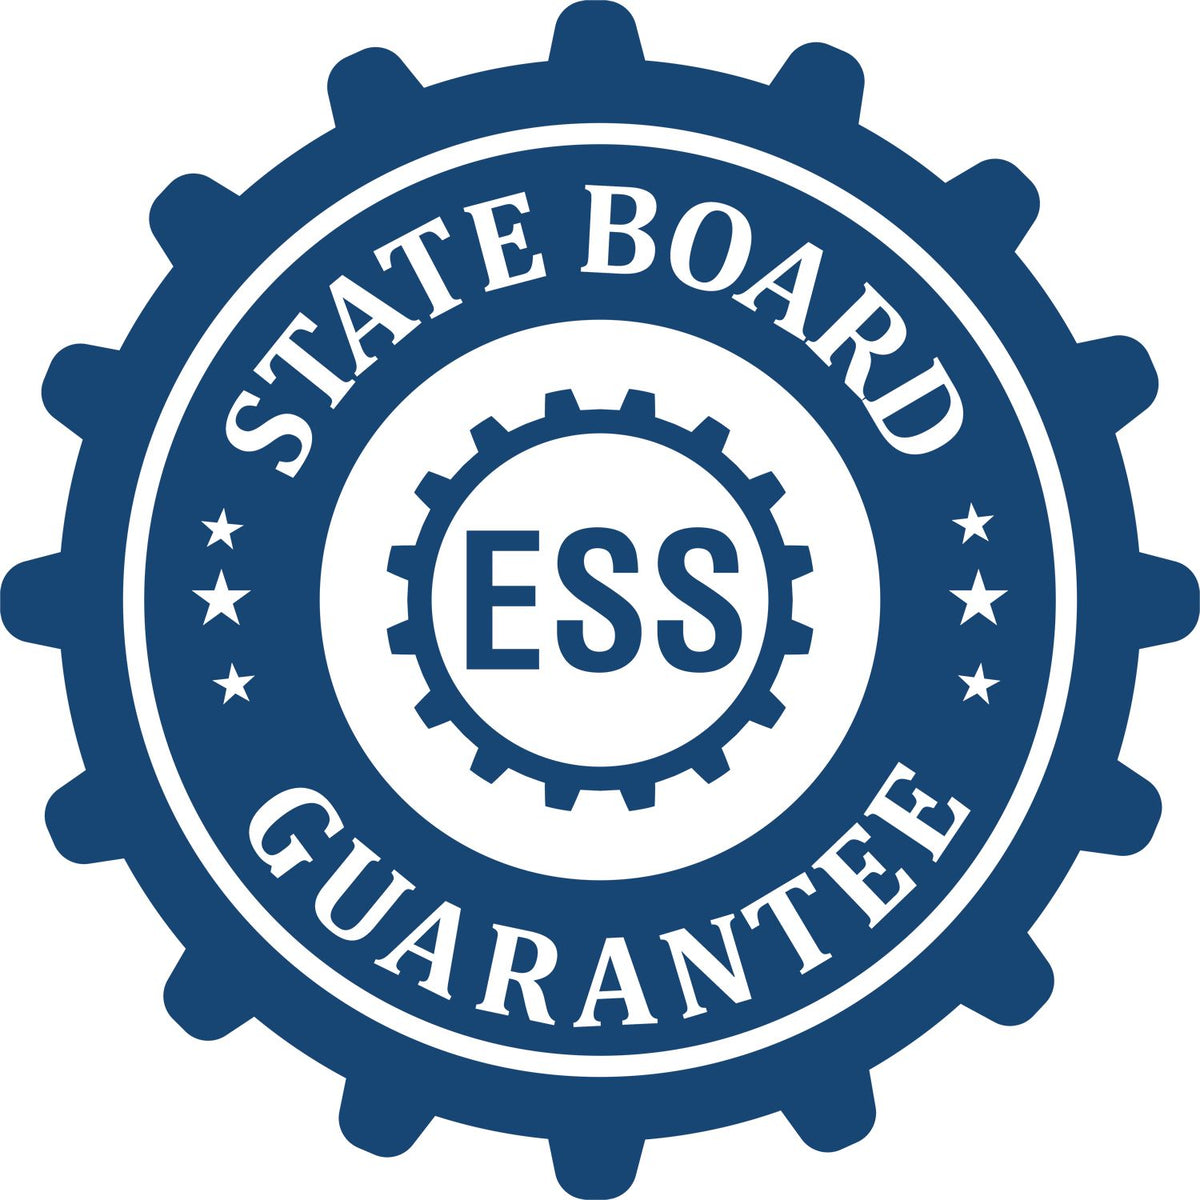 An emblem in a gear shape illustrating a state board guarantee for the State of Alabama Extended Long Reach Engineer Seal product.